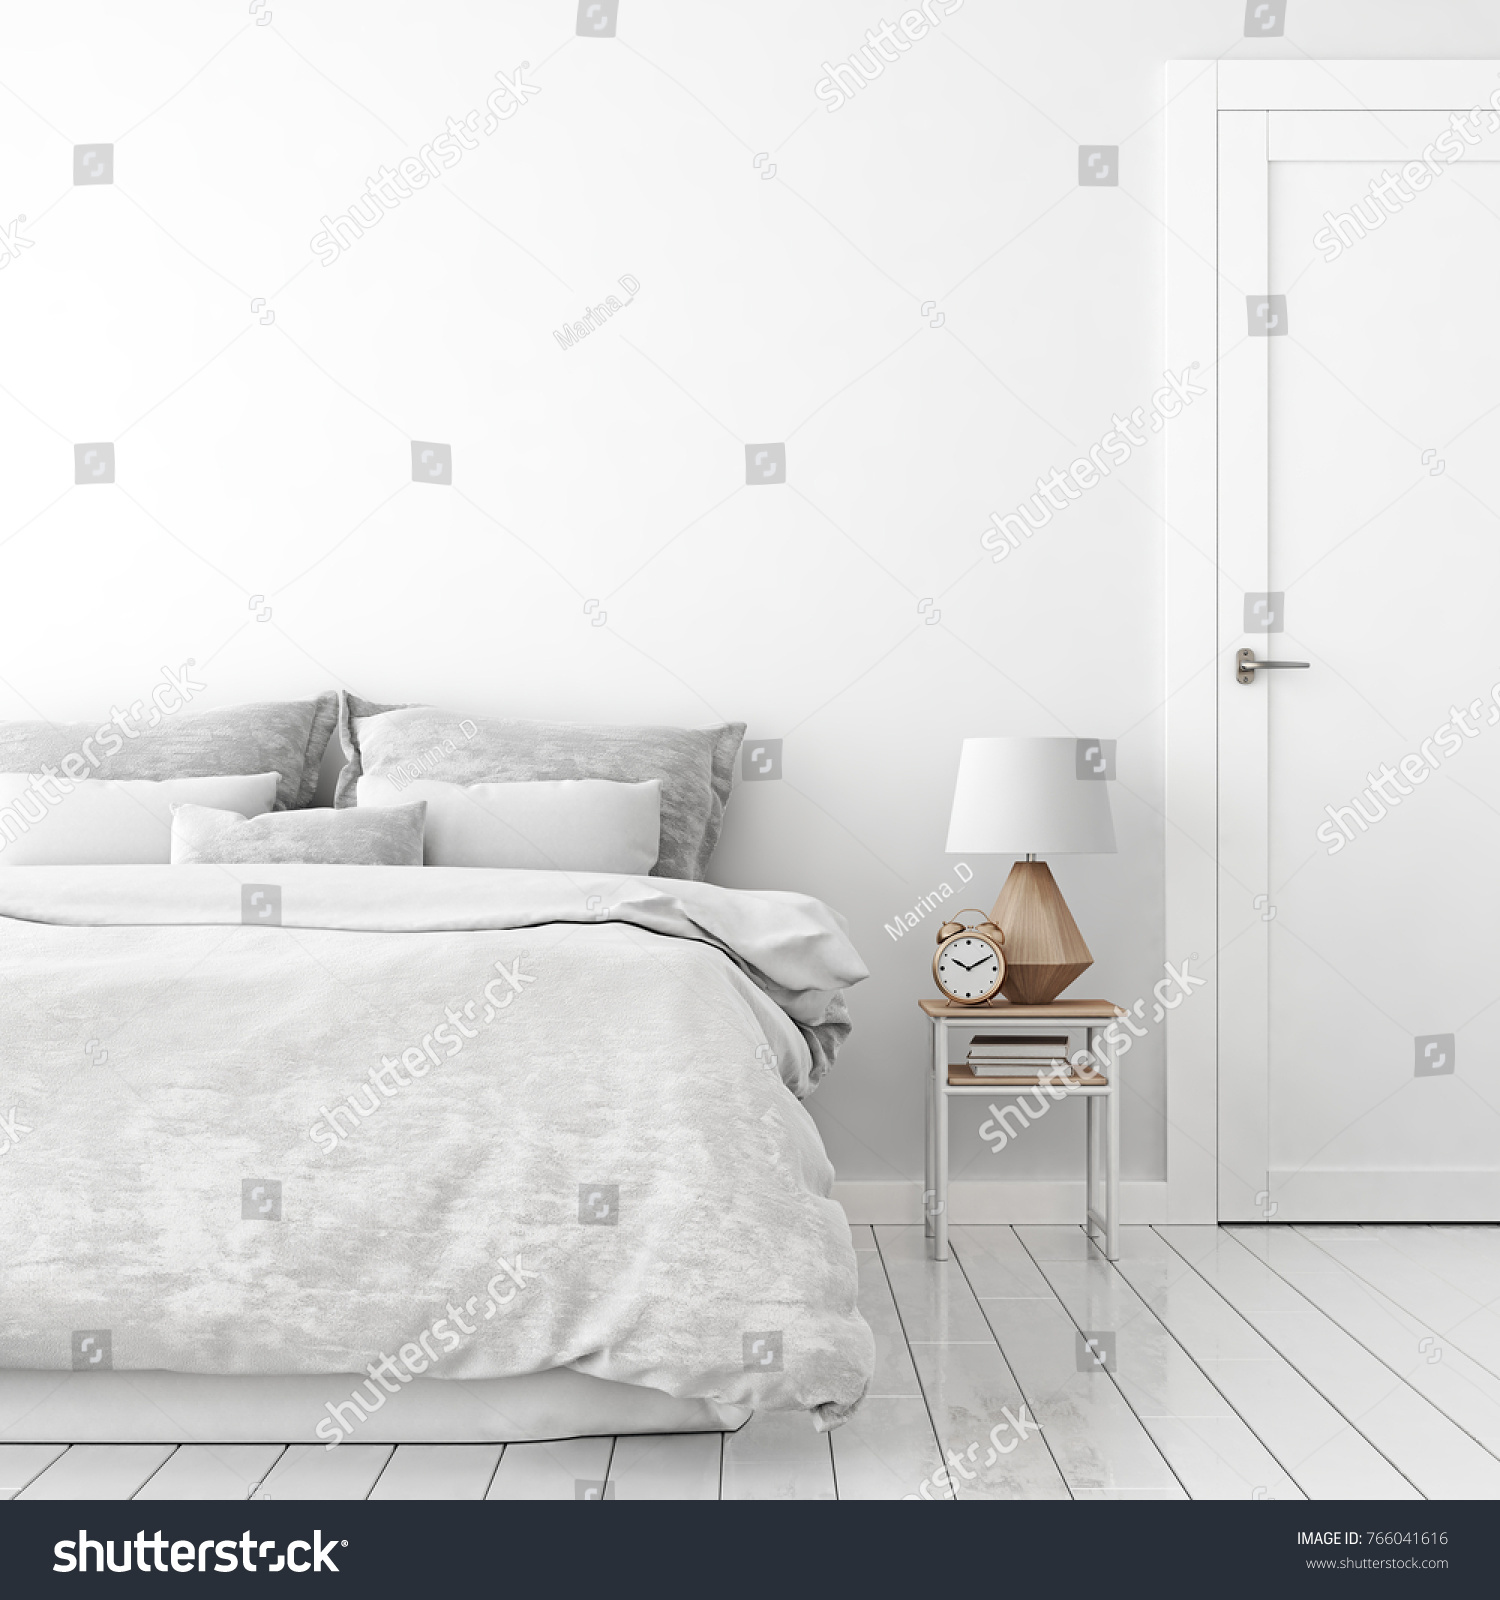 Home Interior Wall Mock Unmade Bed Stock Illustration 766041616